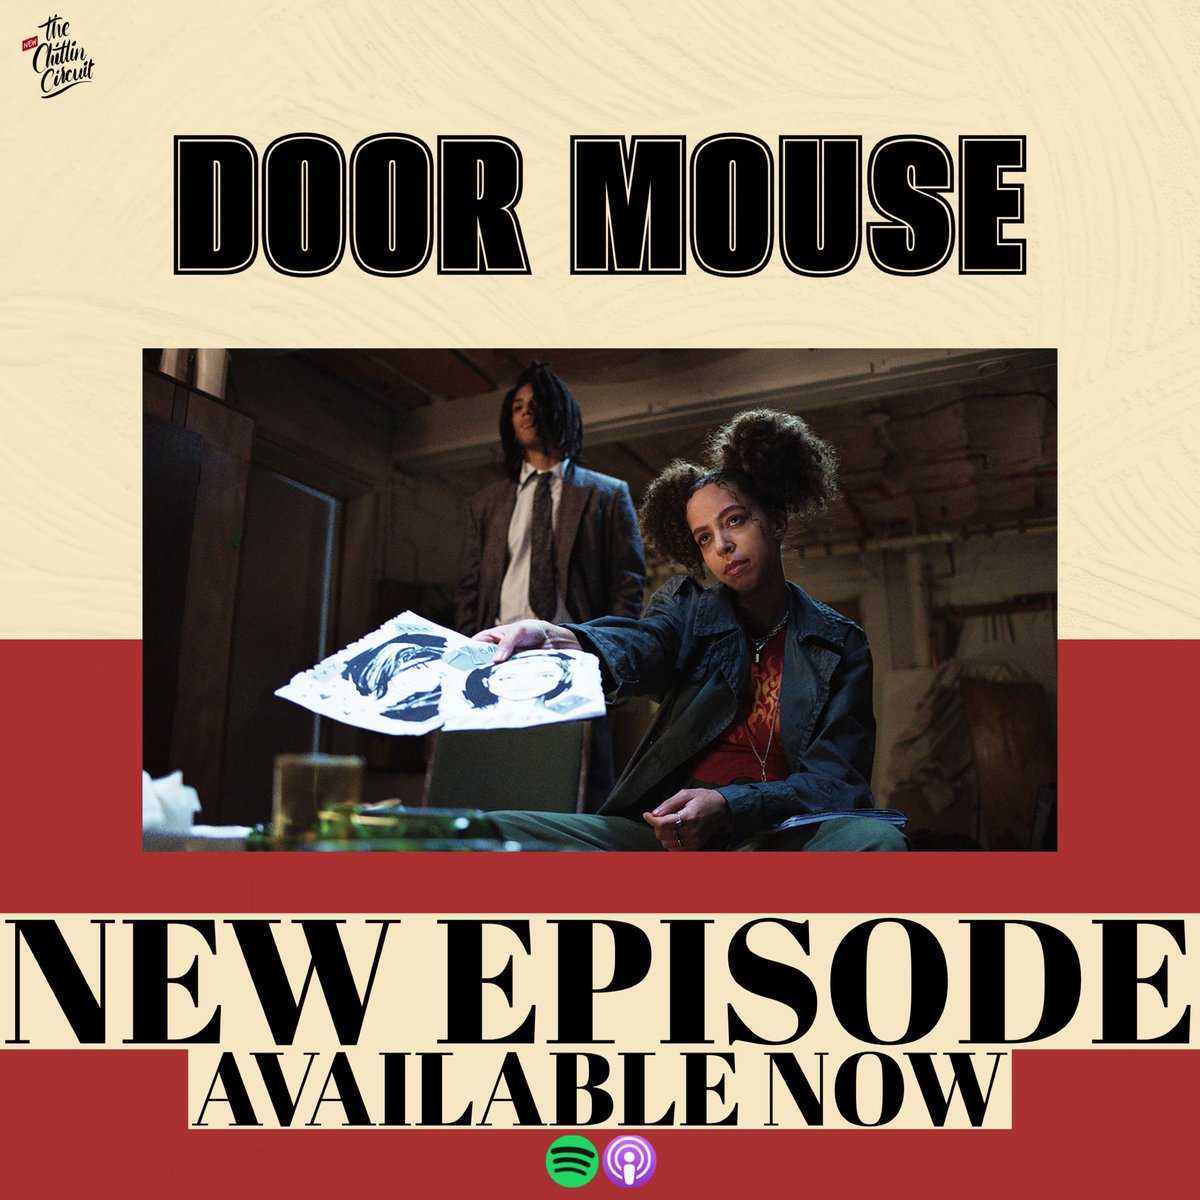 [NEW EPISODE] This week, we reviewed ‘Door Mouse’ (2023) from writer/dir. @AvanJogia. Starring @hayleau & @KeithTPowers. 

LISTEN+SUBSCRIBE 🎧👇🏾
podcasts.apple.com/us/podcast/the…
#TheNewChitlinCircuit #PodsInColor